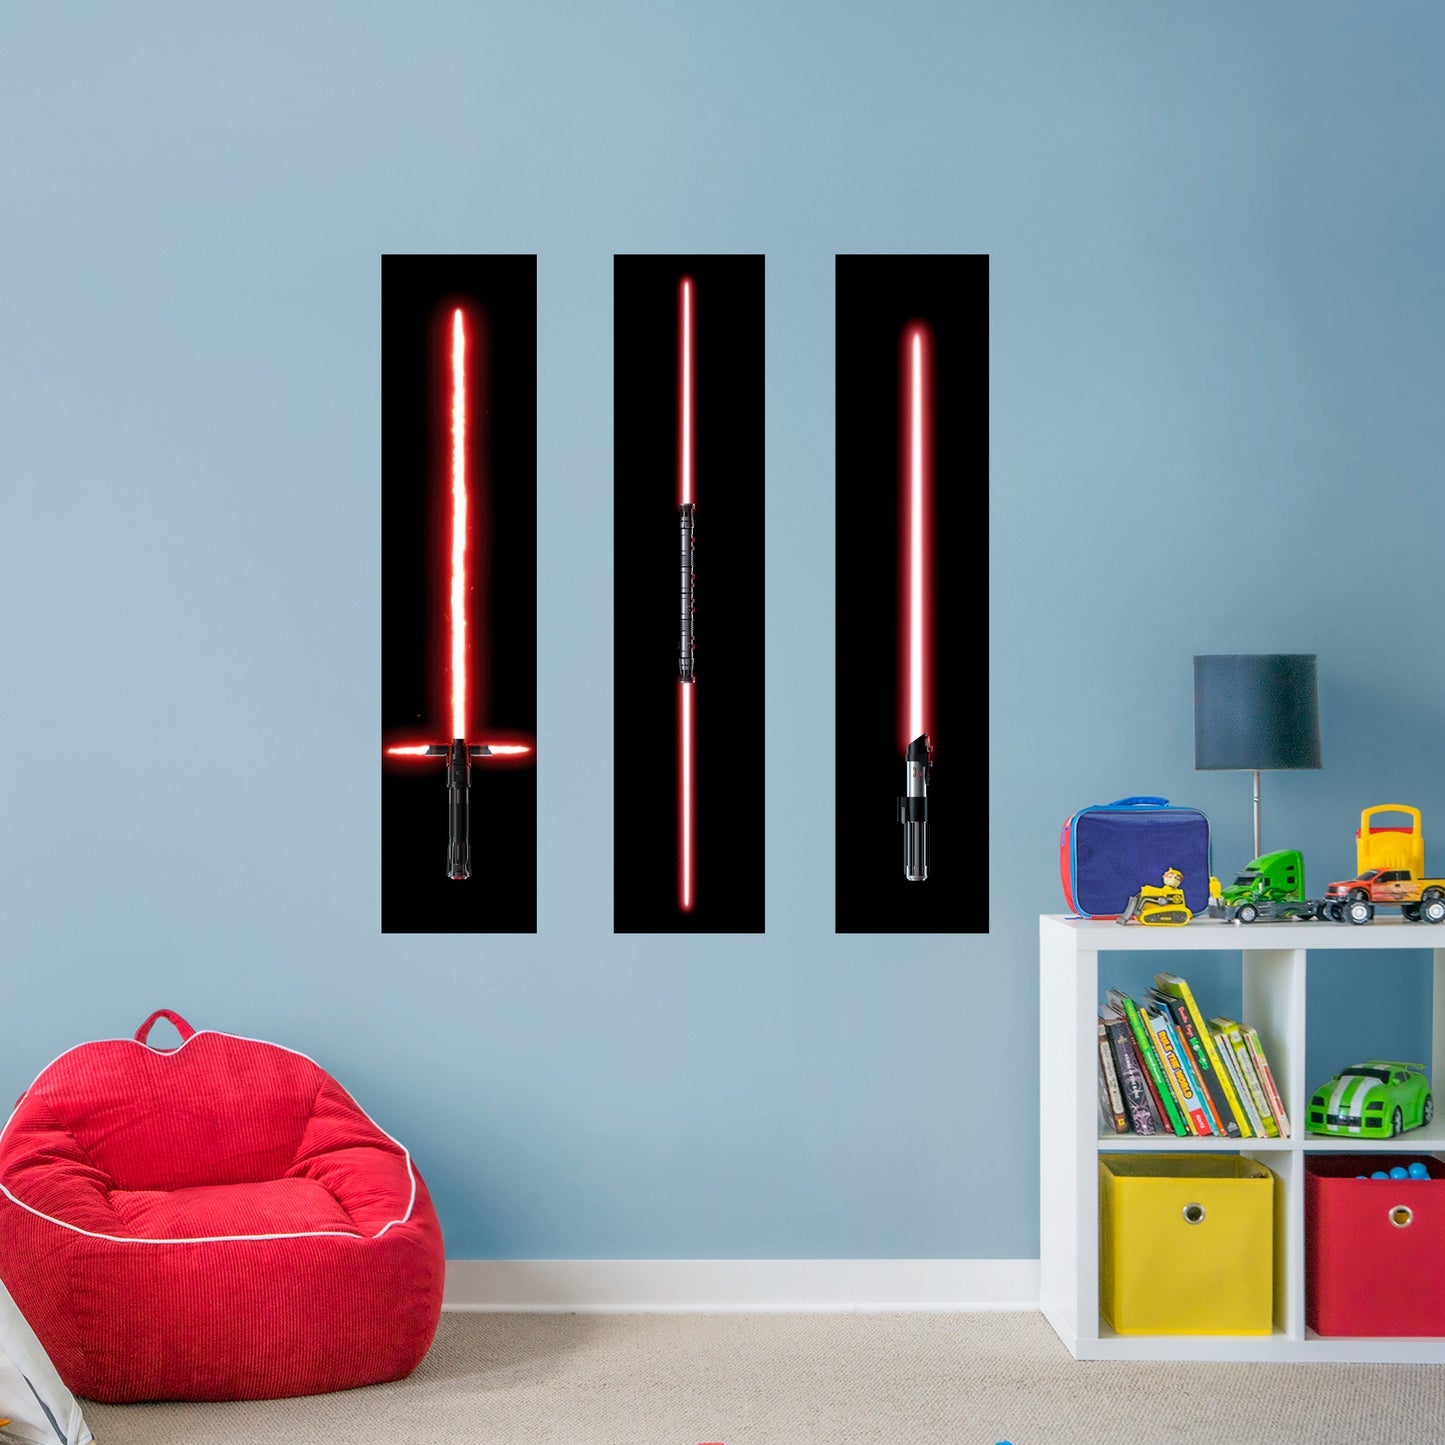 Sith Lightsaber Murals Collection  - Officially Licensed Star Wars Removable Wall Decal